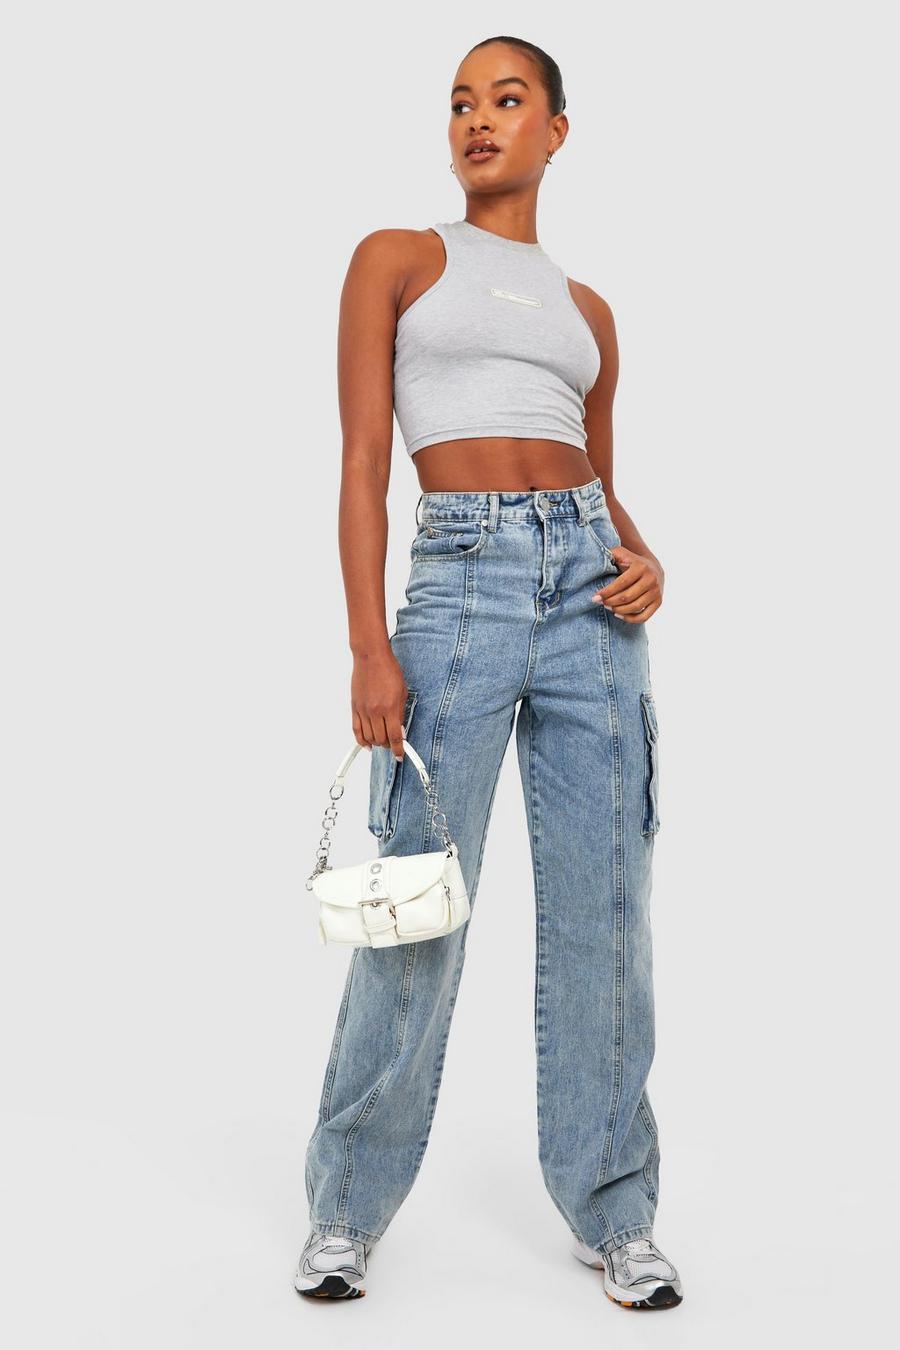 Jeans Tall in lavaggio acido con tasche Cargo, Acid wash light blue image number 1